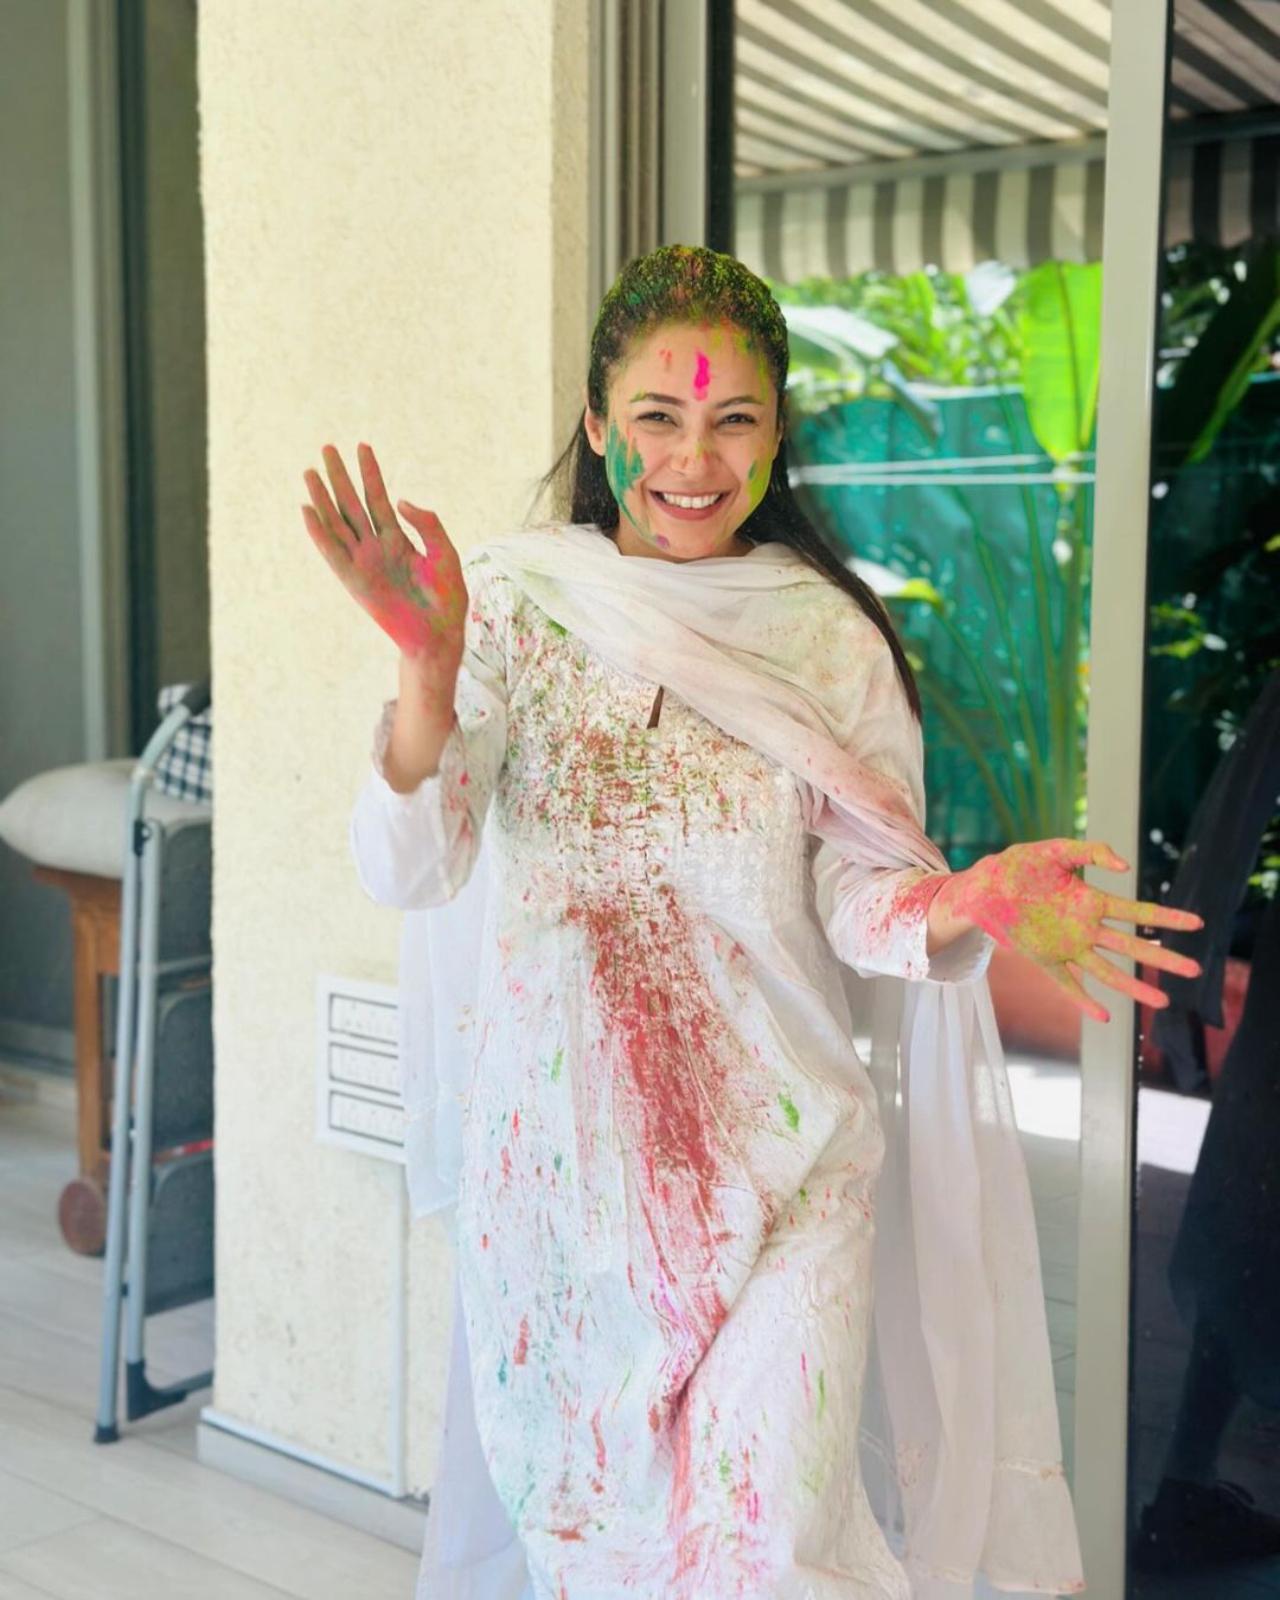 Shehnaaz Gill posted some happy pictures from her Holi celebration